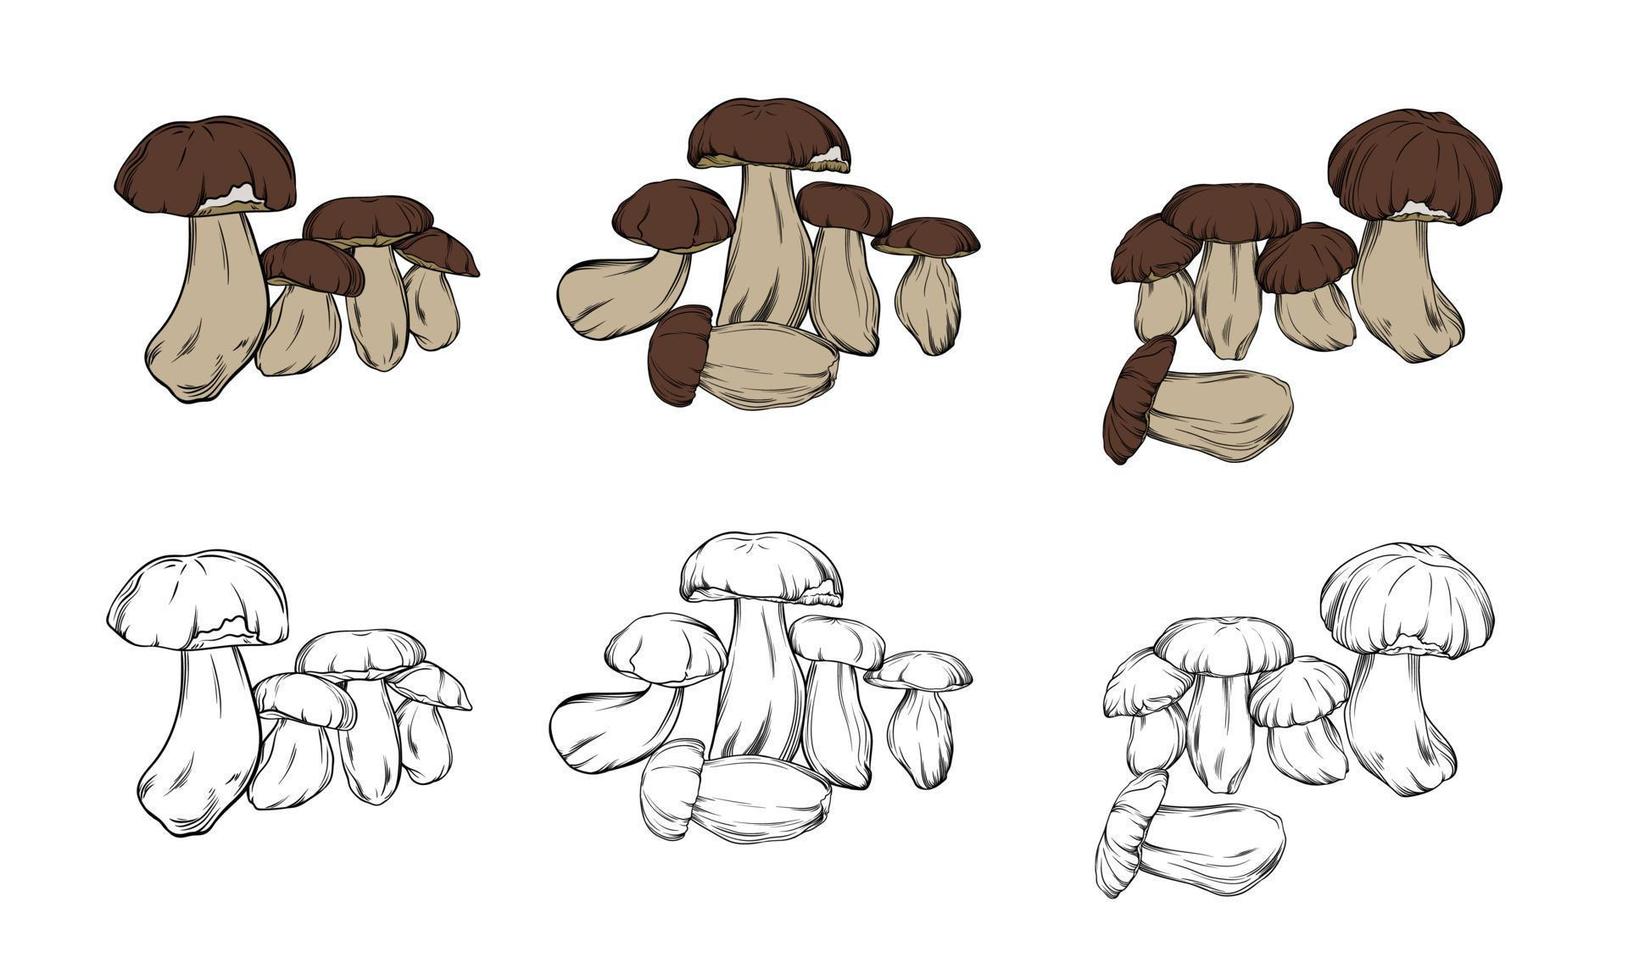 vector set of boletus mushrooms, drawn in black outline with color fill. close-up compositions with boletus mushrooms made in color and monochrome contour lines. vector botanical illustration